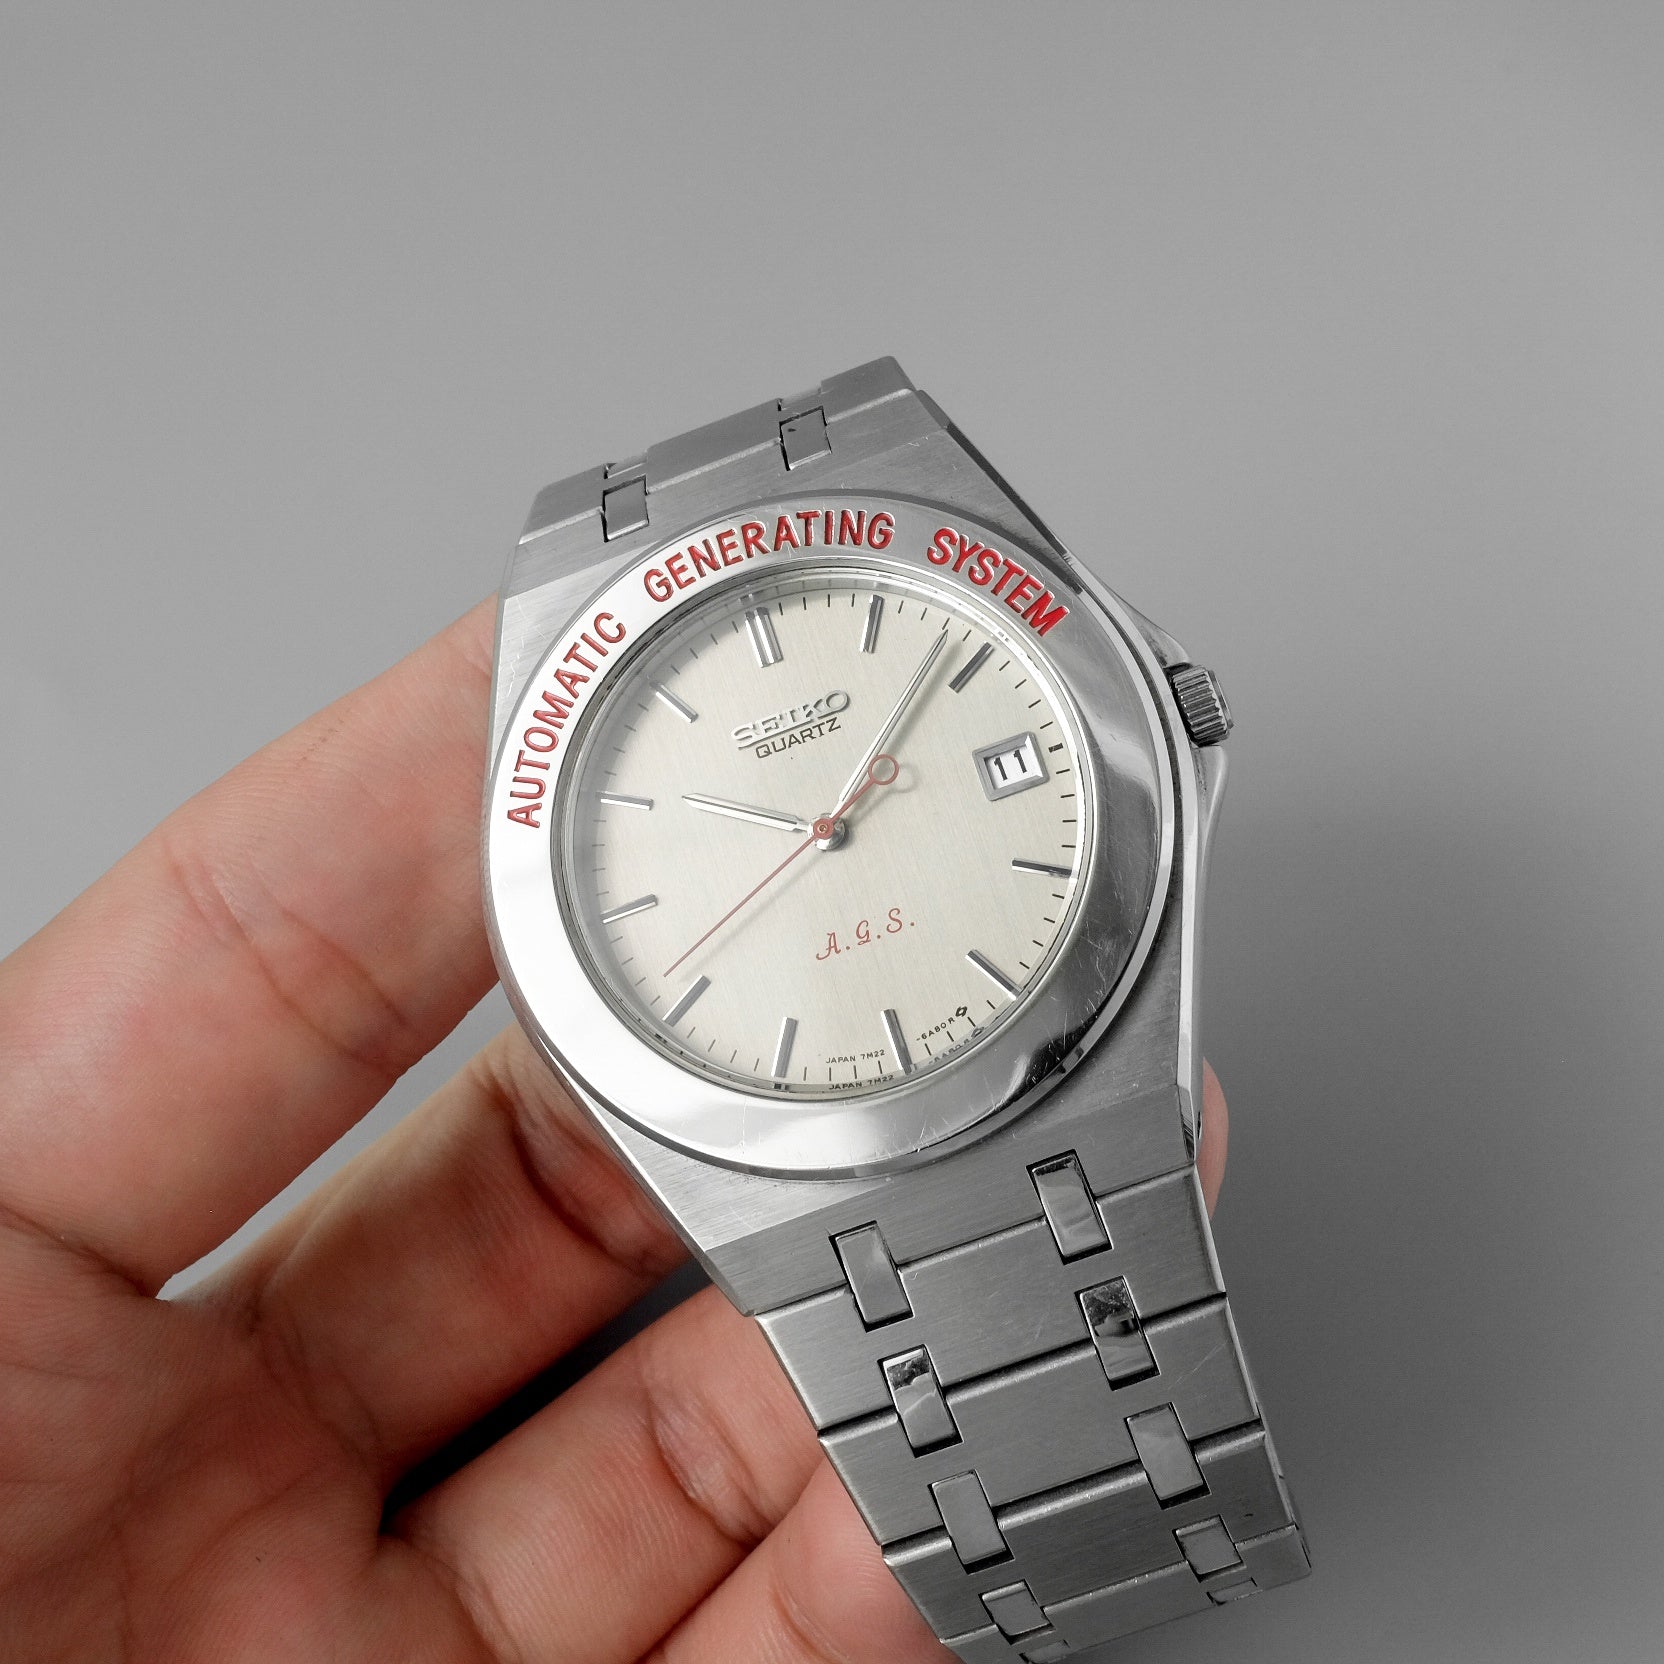 Seiko Automatic Generating System () 7M22-6A50 from 1988 – Paleh